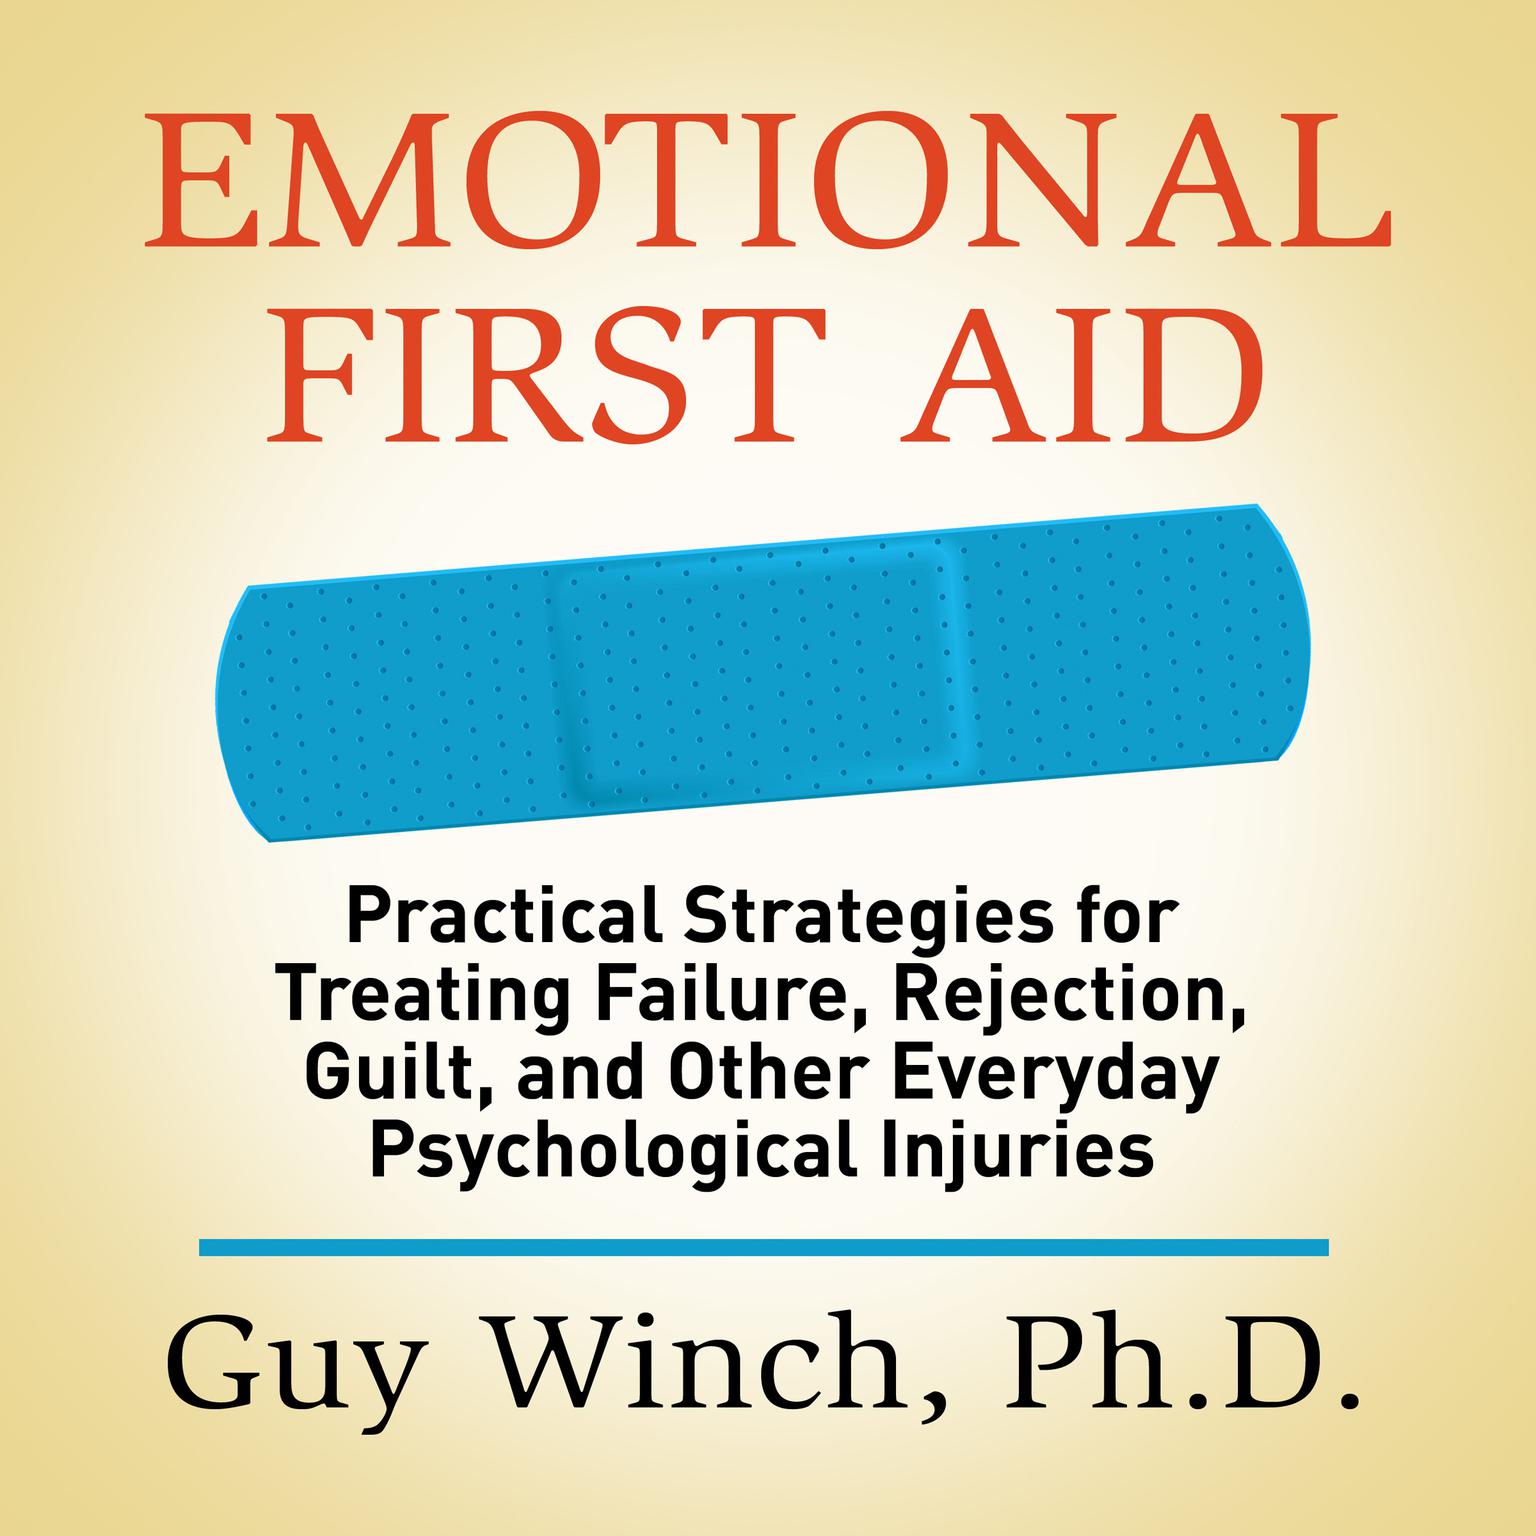 Emotional First Aid: Practical Strategies for Treating Failure, Rejection, Guilt, and Other Everyday Psychological Injuries Audiobook, by Guy Winch